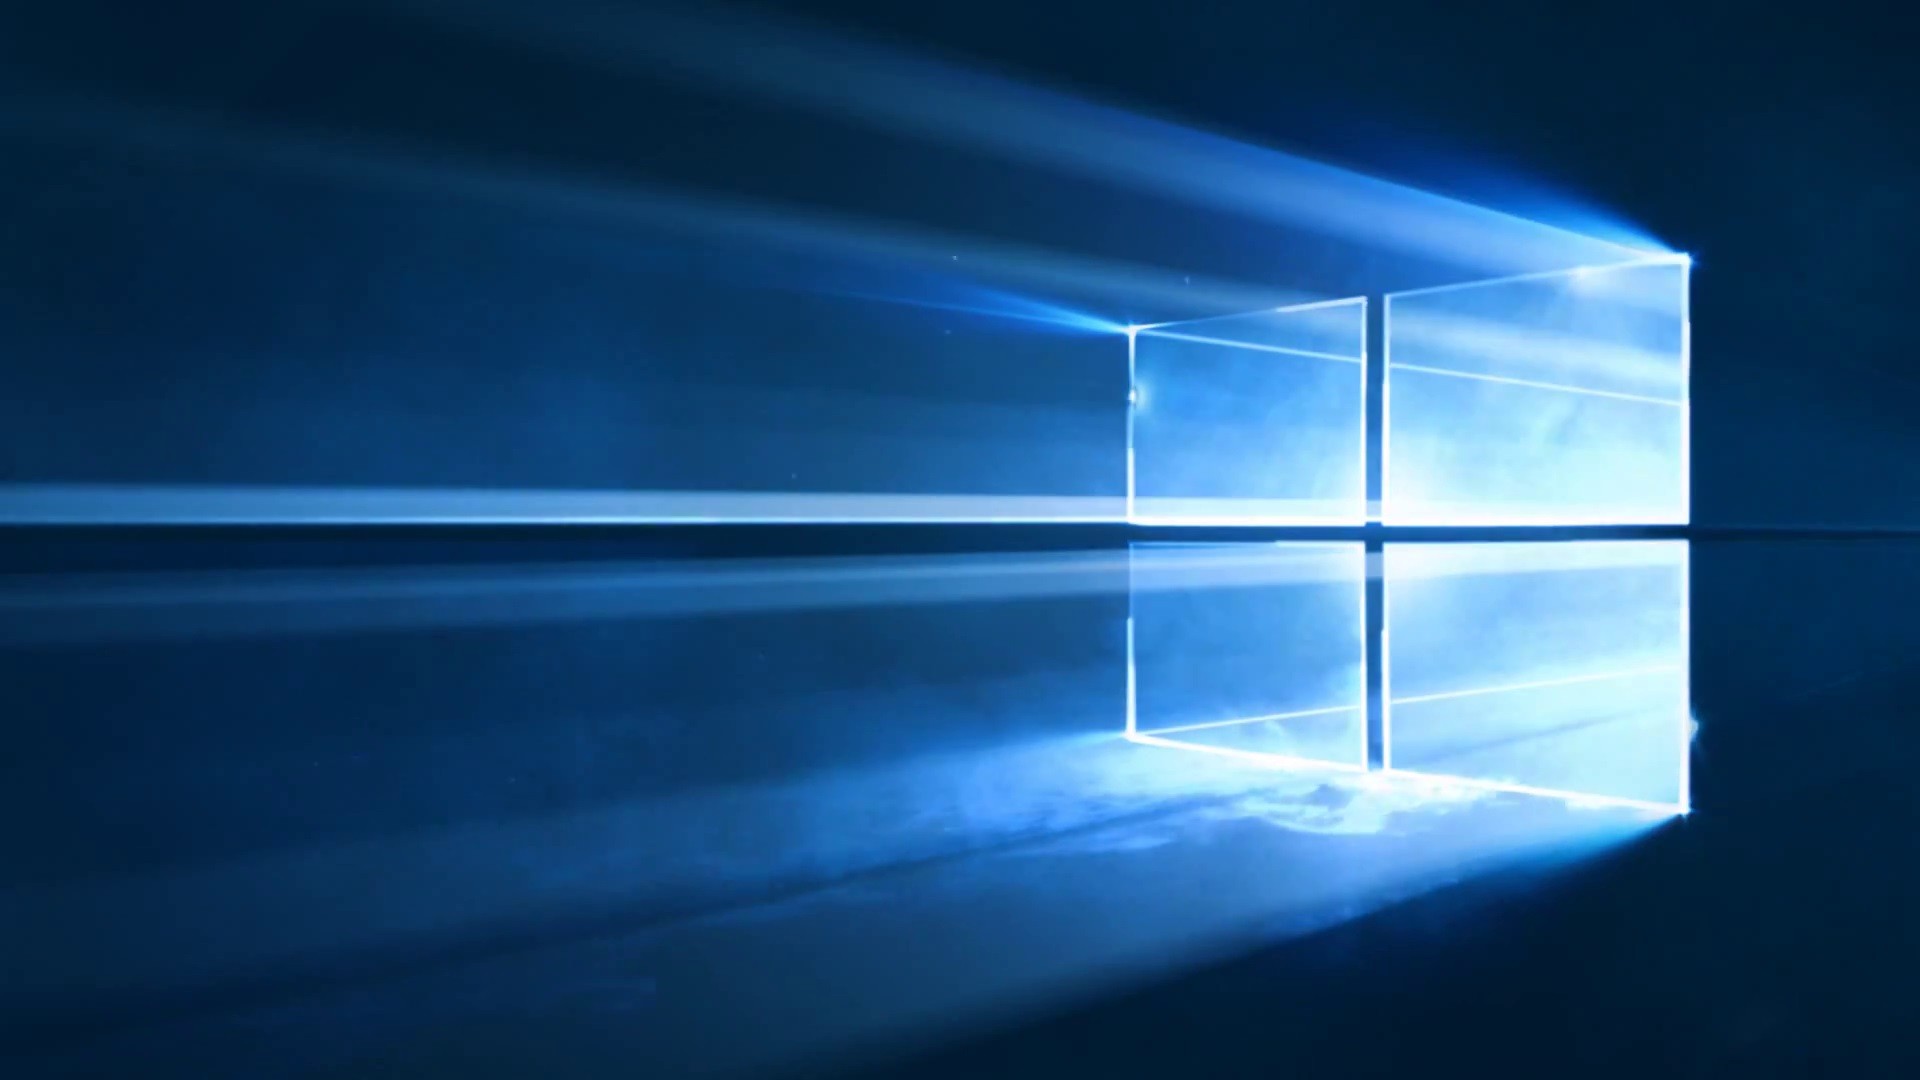 Microsoft Reveals the Official Windows 10 Wallpaper